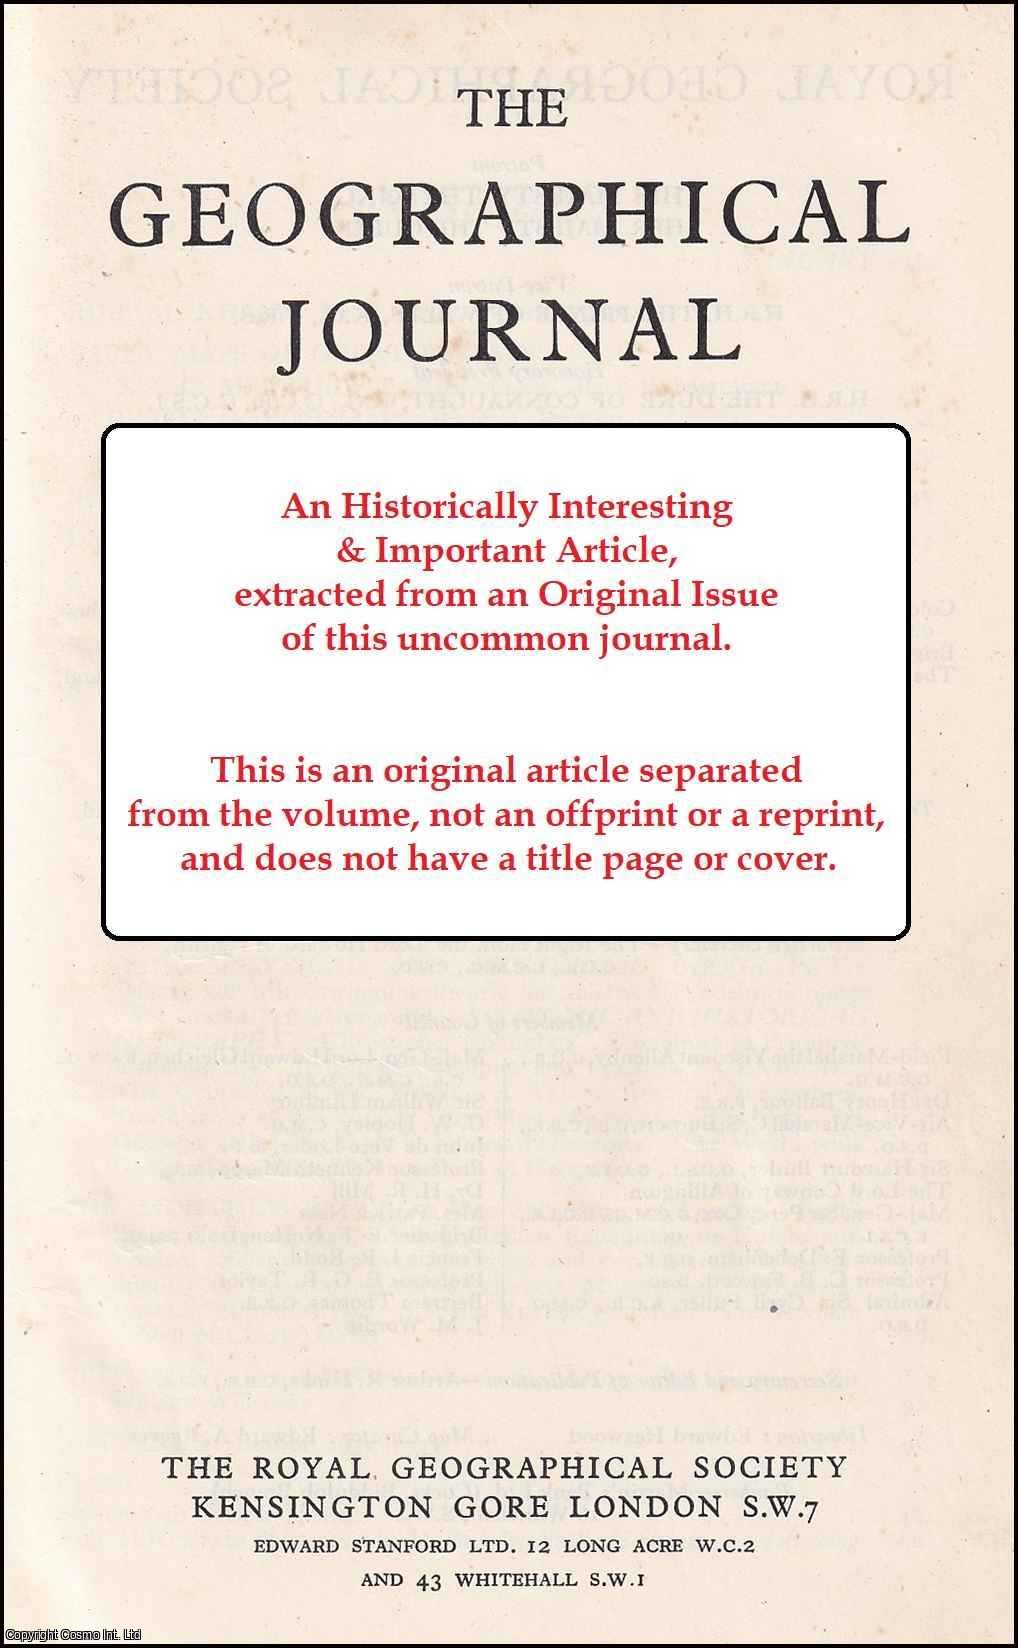 P. Hindle - The Population of The Hashemite Kingdom of Jordon 1961. An original article from the Geographical Journal, 1964.